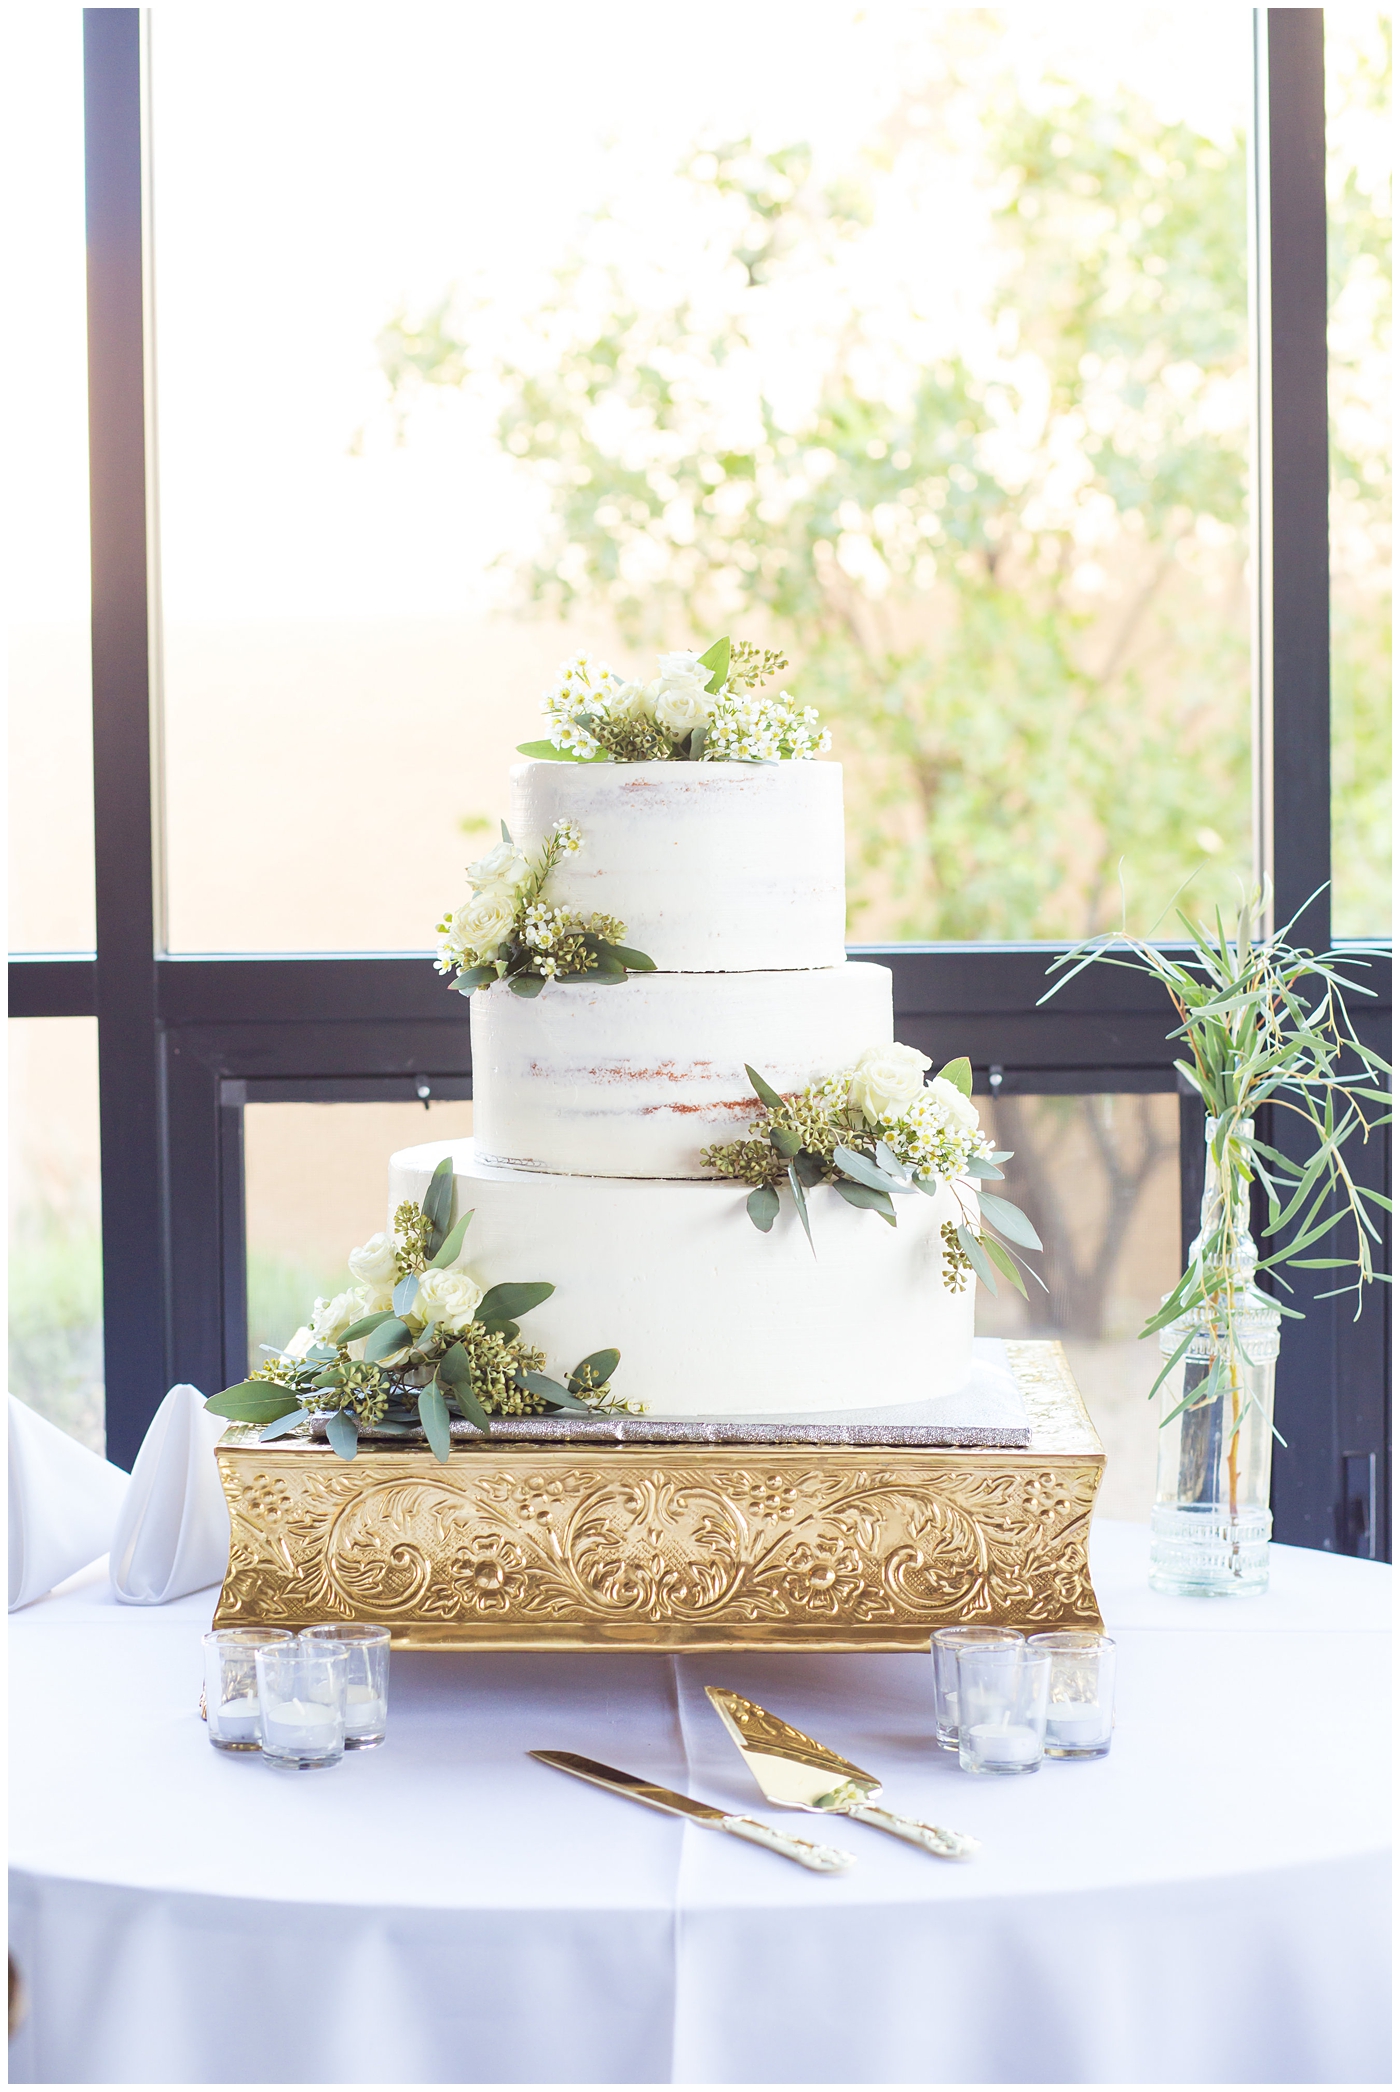 3 tier wedding cake with greenery and white roses wedding day reception detail